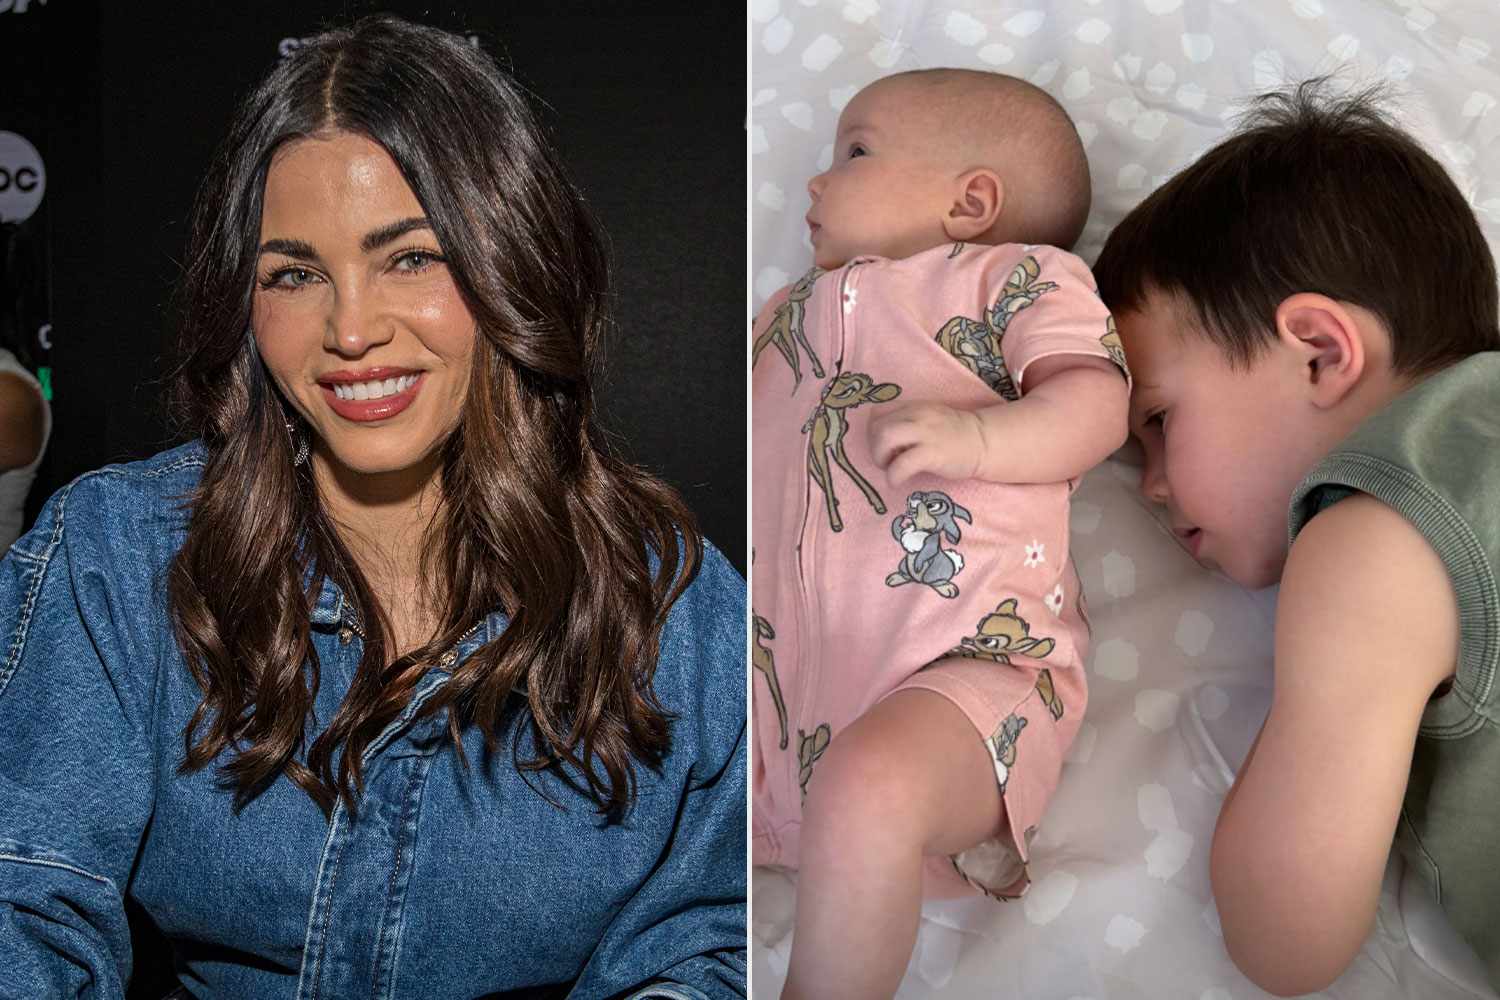 Jenna Dewan Shares Sweet Photos of Son Callum, 4, and Baby Daughter Rhiannon Spending Time Together